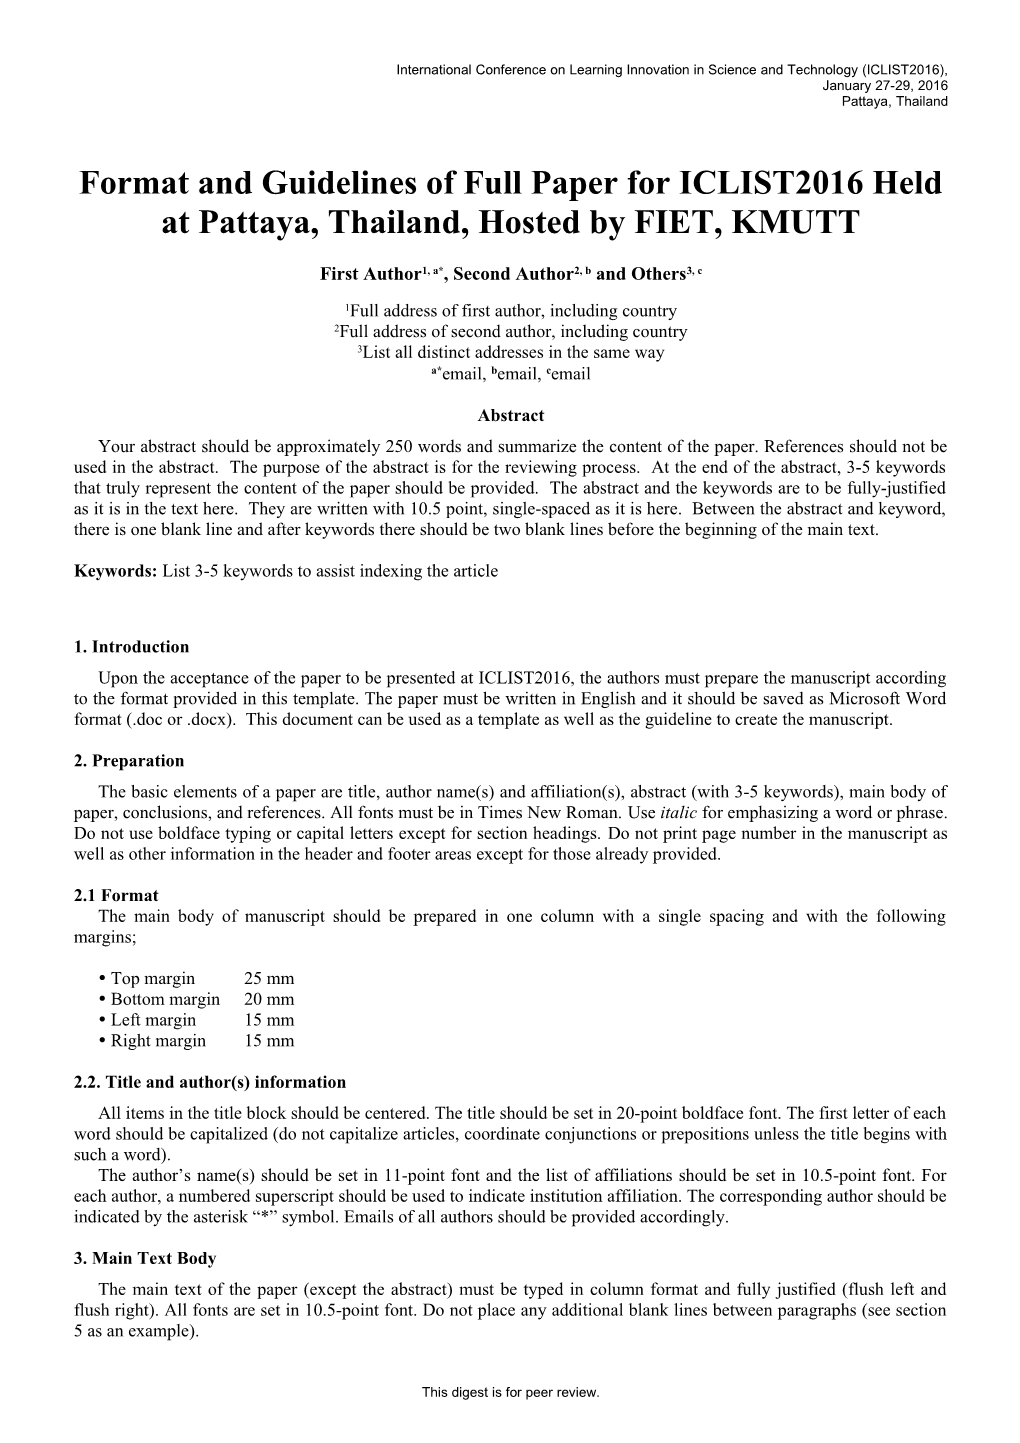 Example Format of Paper: ICLIST2010 Held at Pattaya, Thailand Organized by Fiet